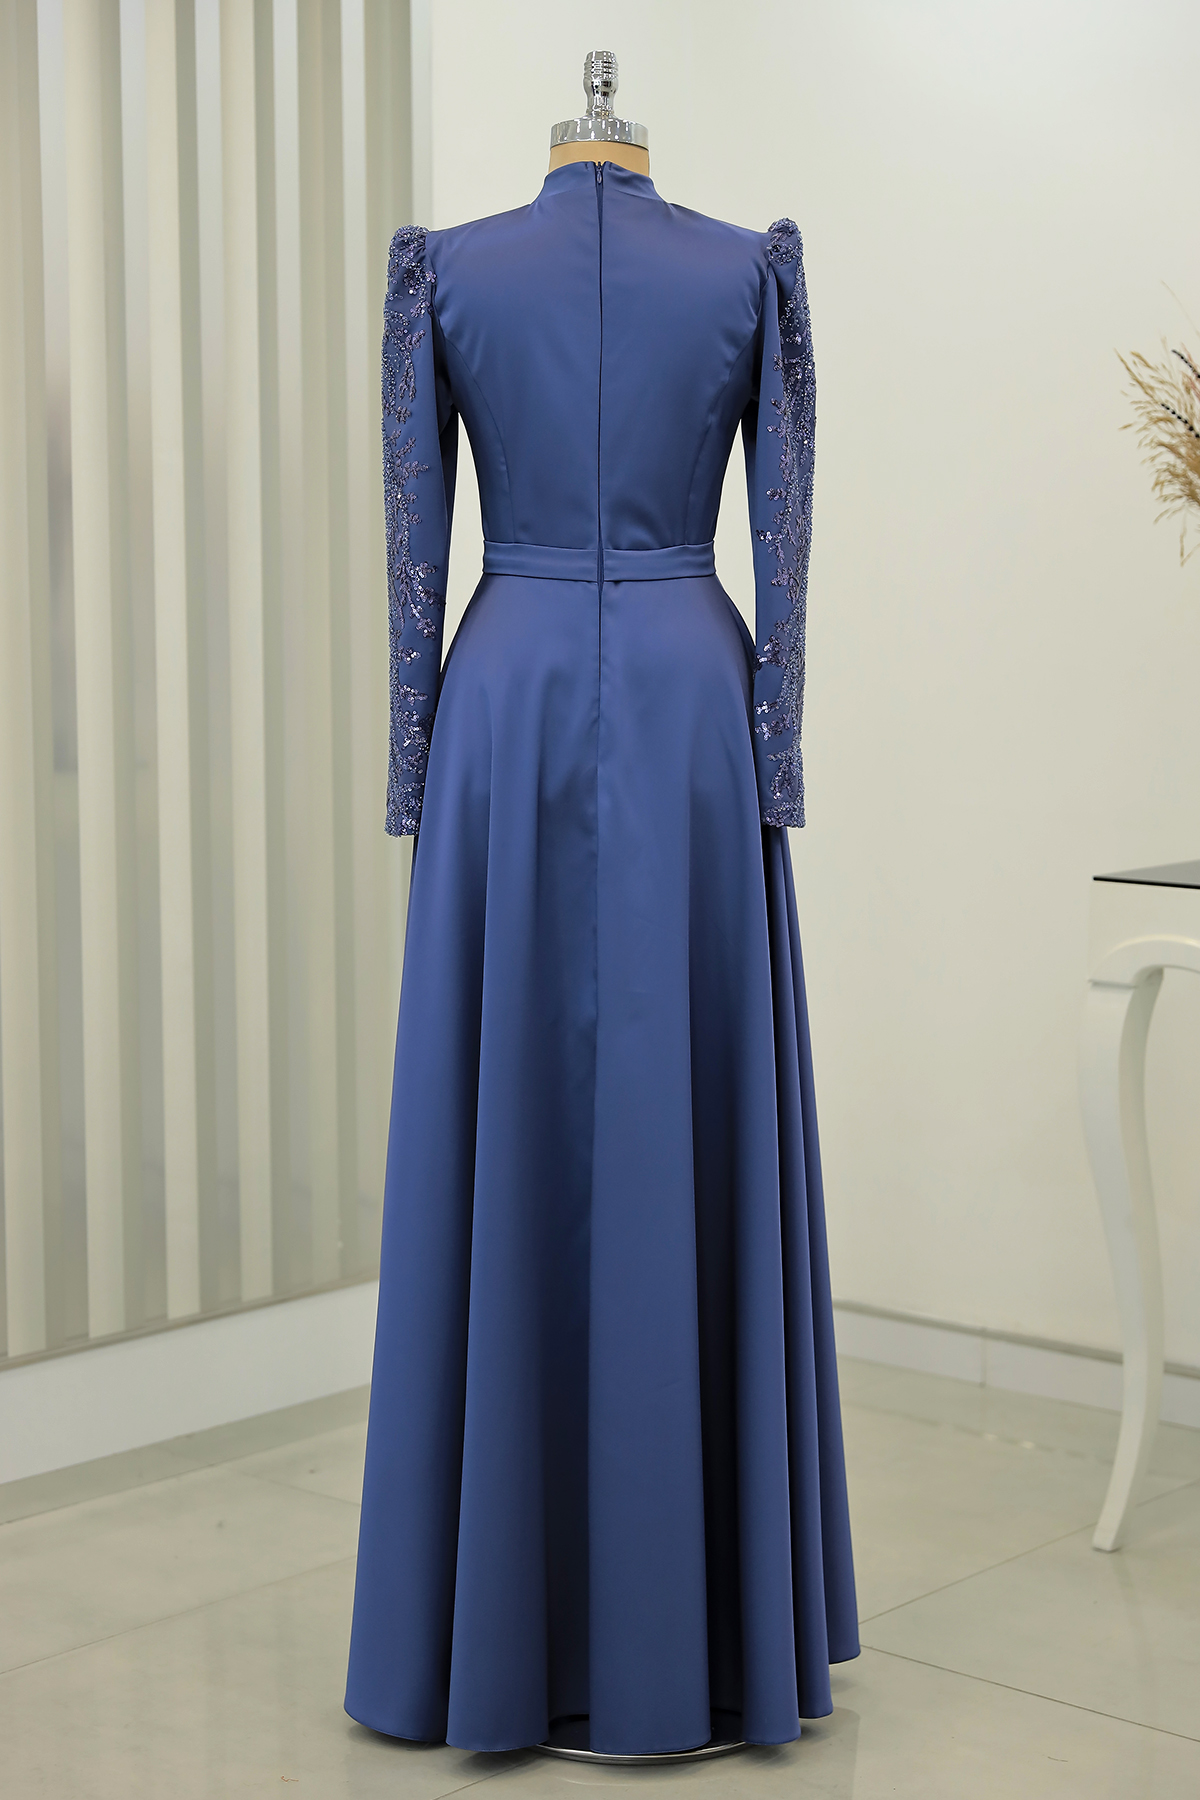 2022 Luxury High Neck Muslim Second Hand Evening Gowns With Pocket, Beaded  Sequins Embroidery, And Long Sleeves Perfect For Arabic Weddings And Proms  From Alegant_lady, $195.93 | DHgate.Com